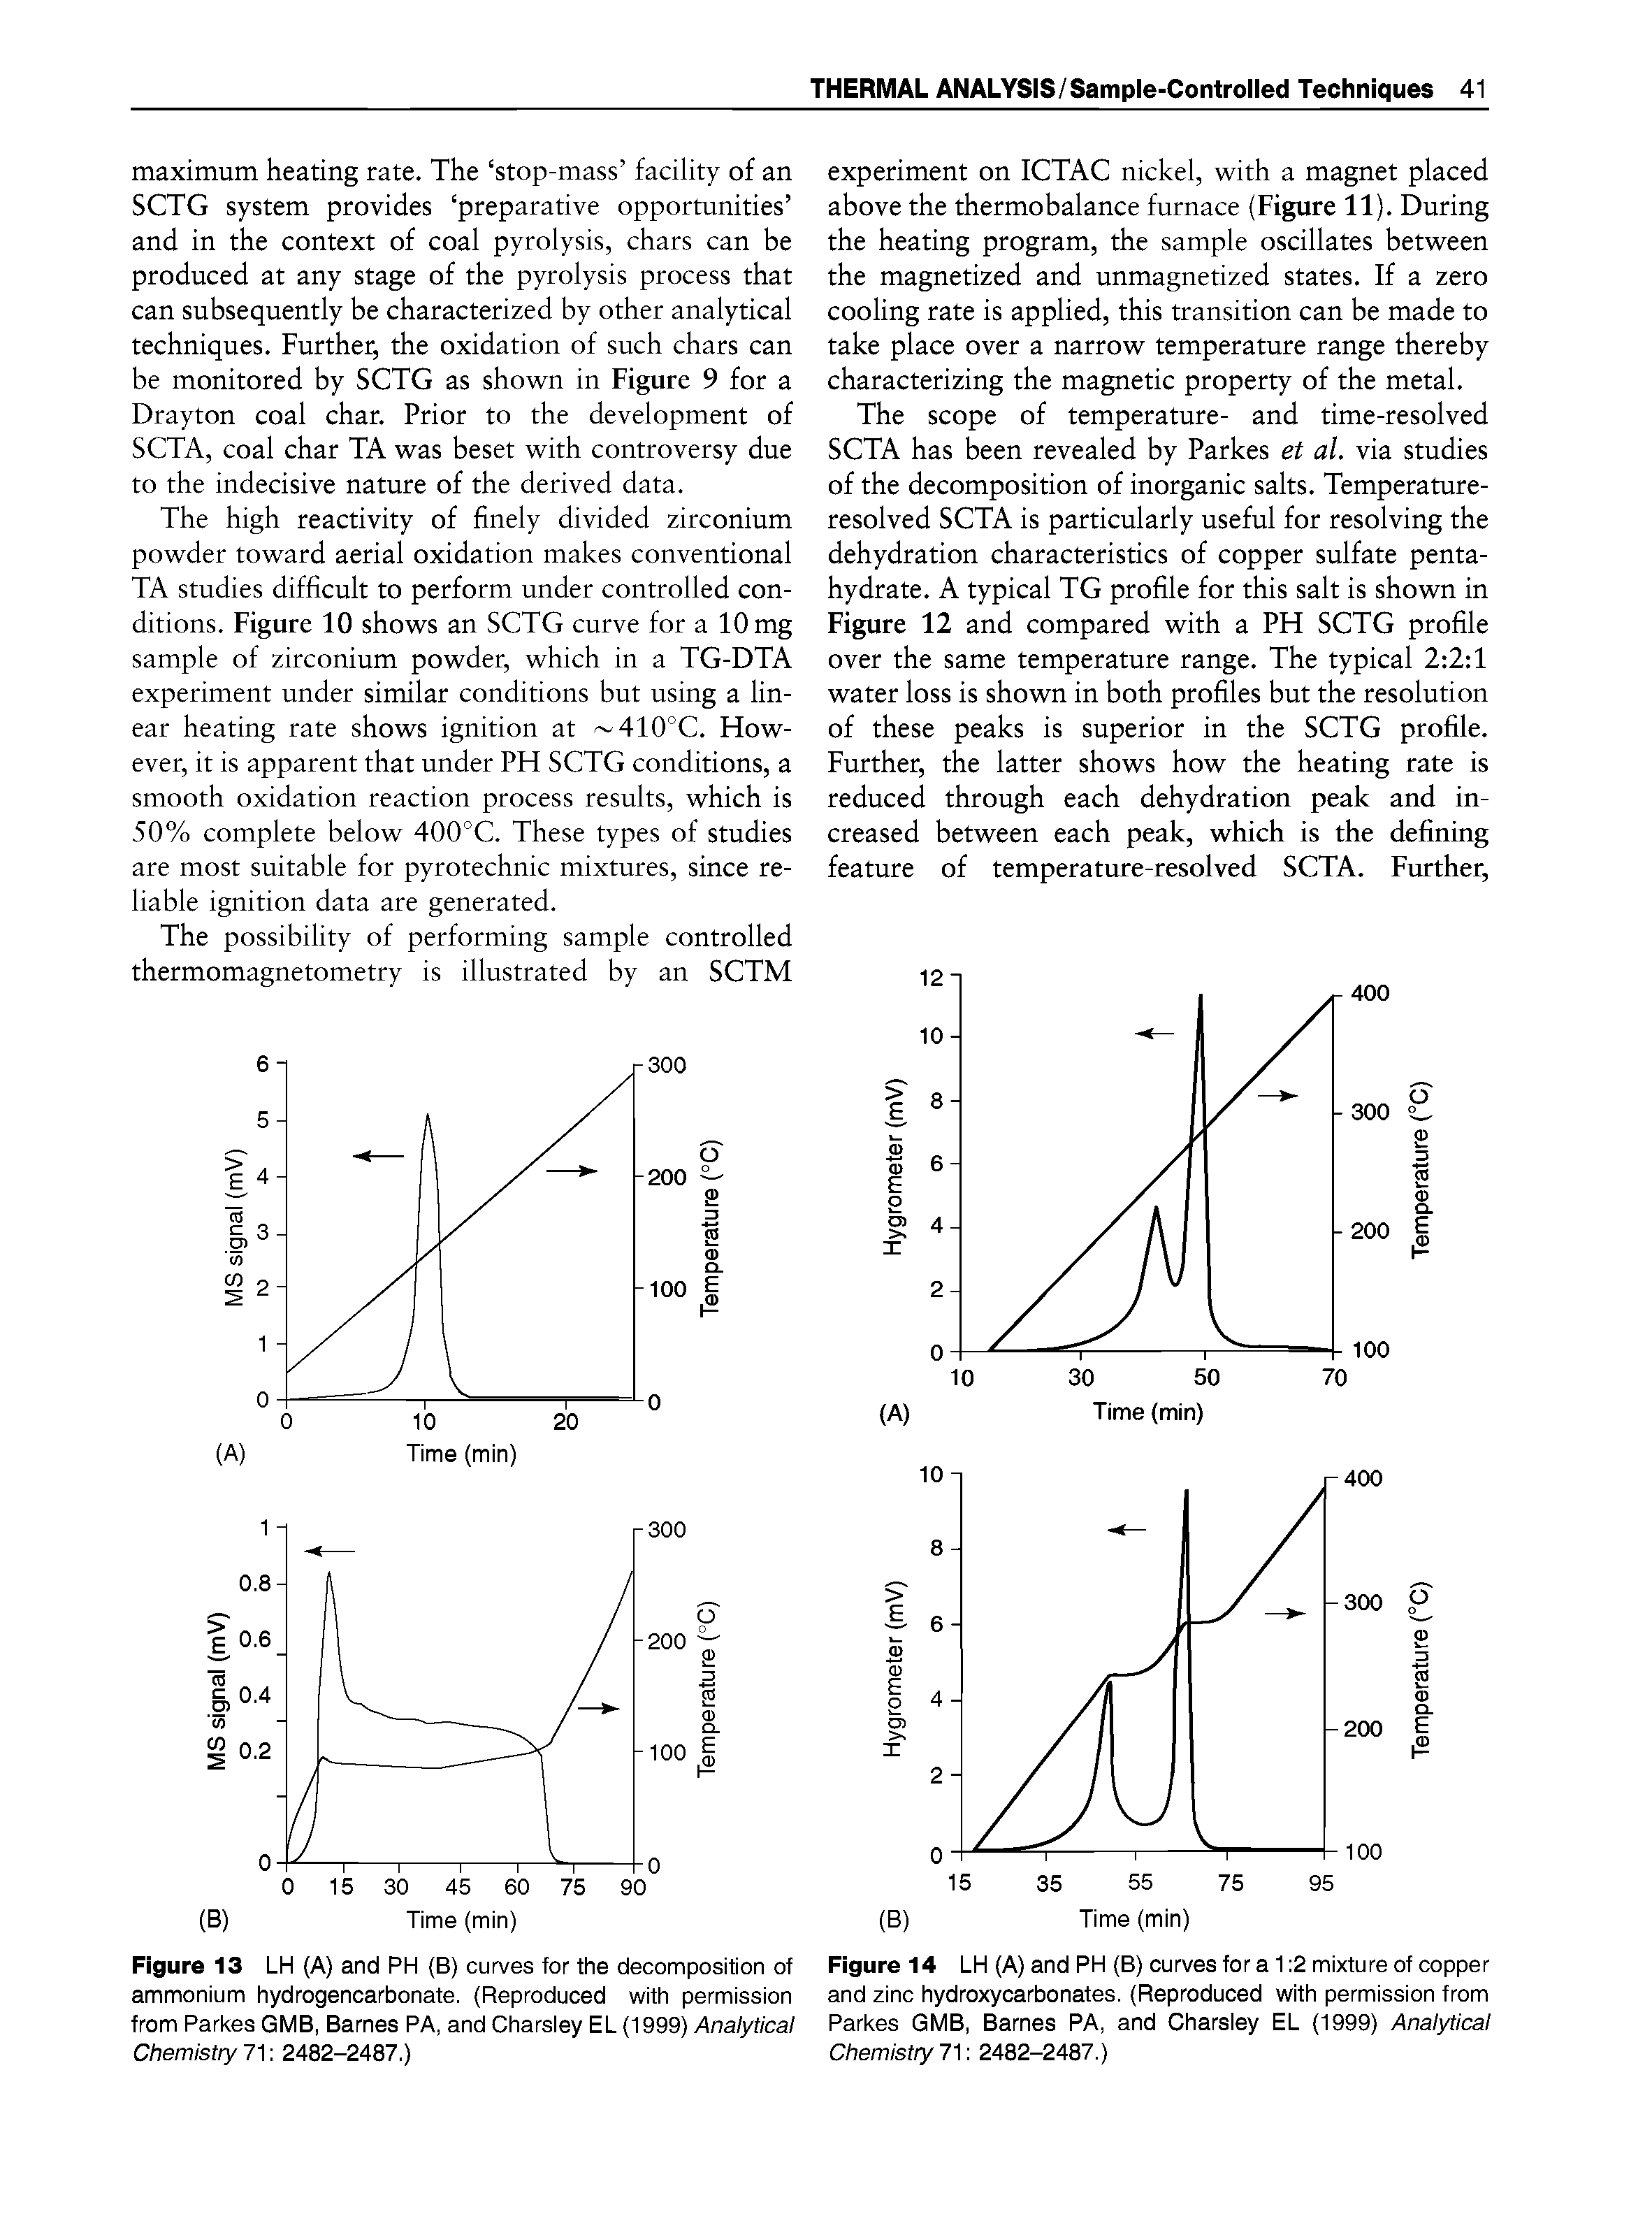 Figure 13 LH (A) and PH (B) curves for the decomposition of ammonium hydrogencarbonate. (Reproduced with permission from Parkes GMB, Barnes PA, and Charsiey EL (1999) Analytical Chemistry 71 2482-2487.)...